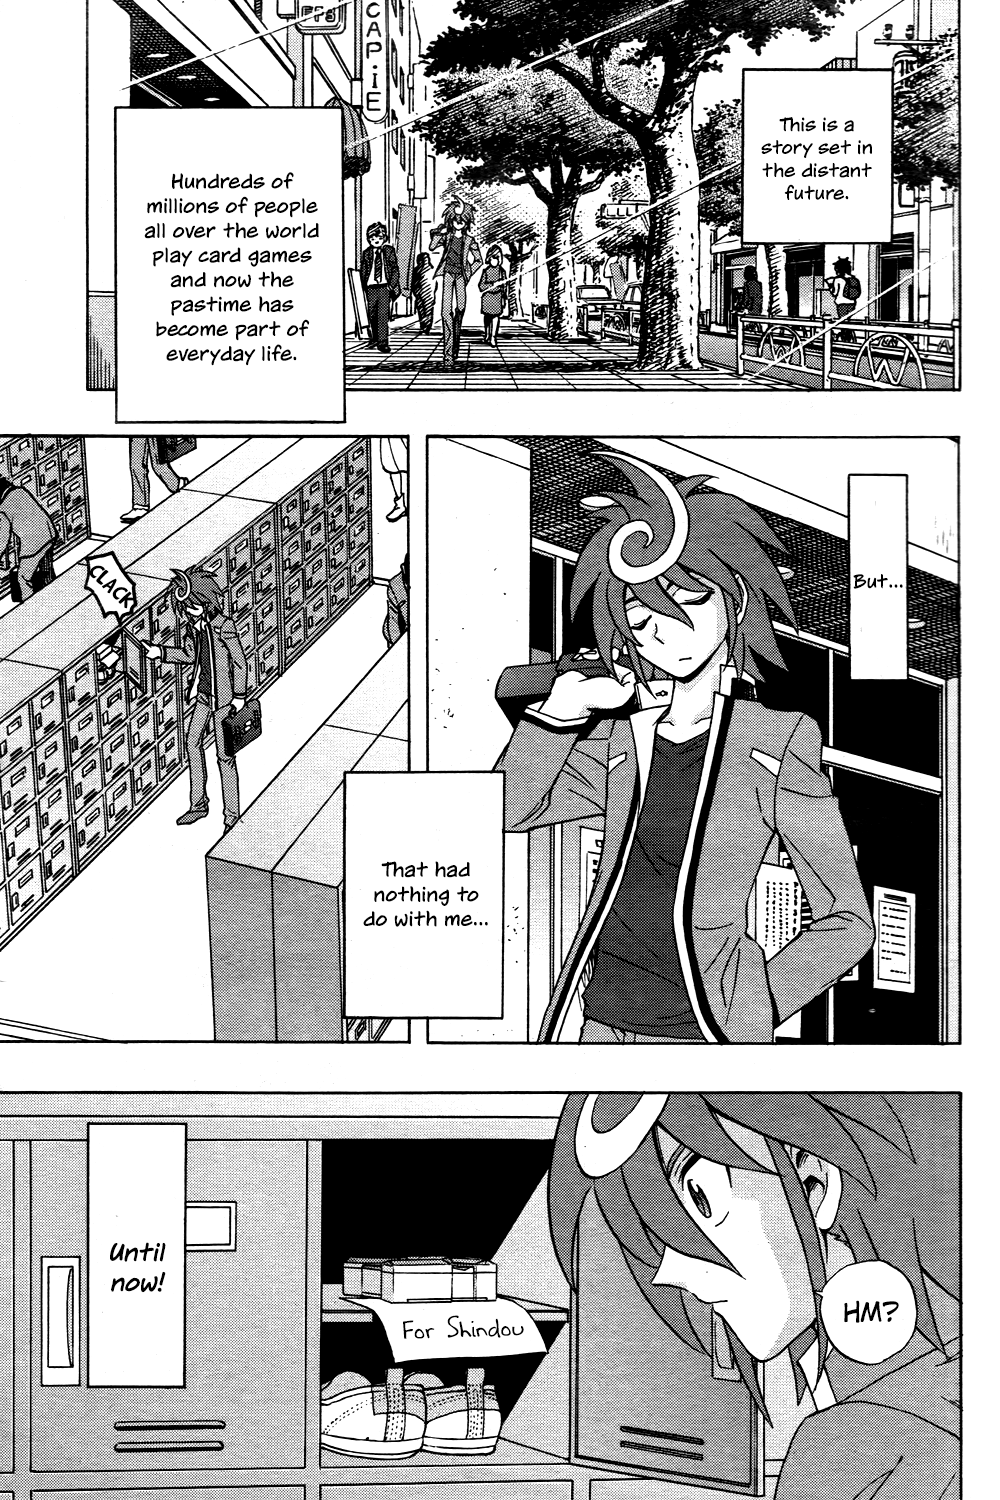 Cardfight!! Vanguard G: The Prologue Vol.1 Chapter 1: A New Vanguard!? - Picture 1